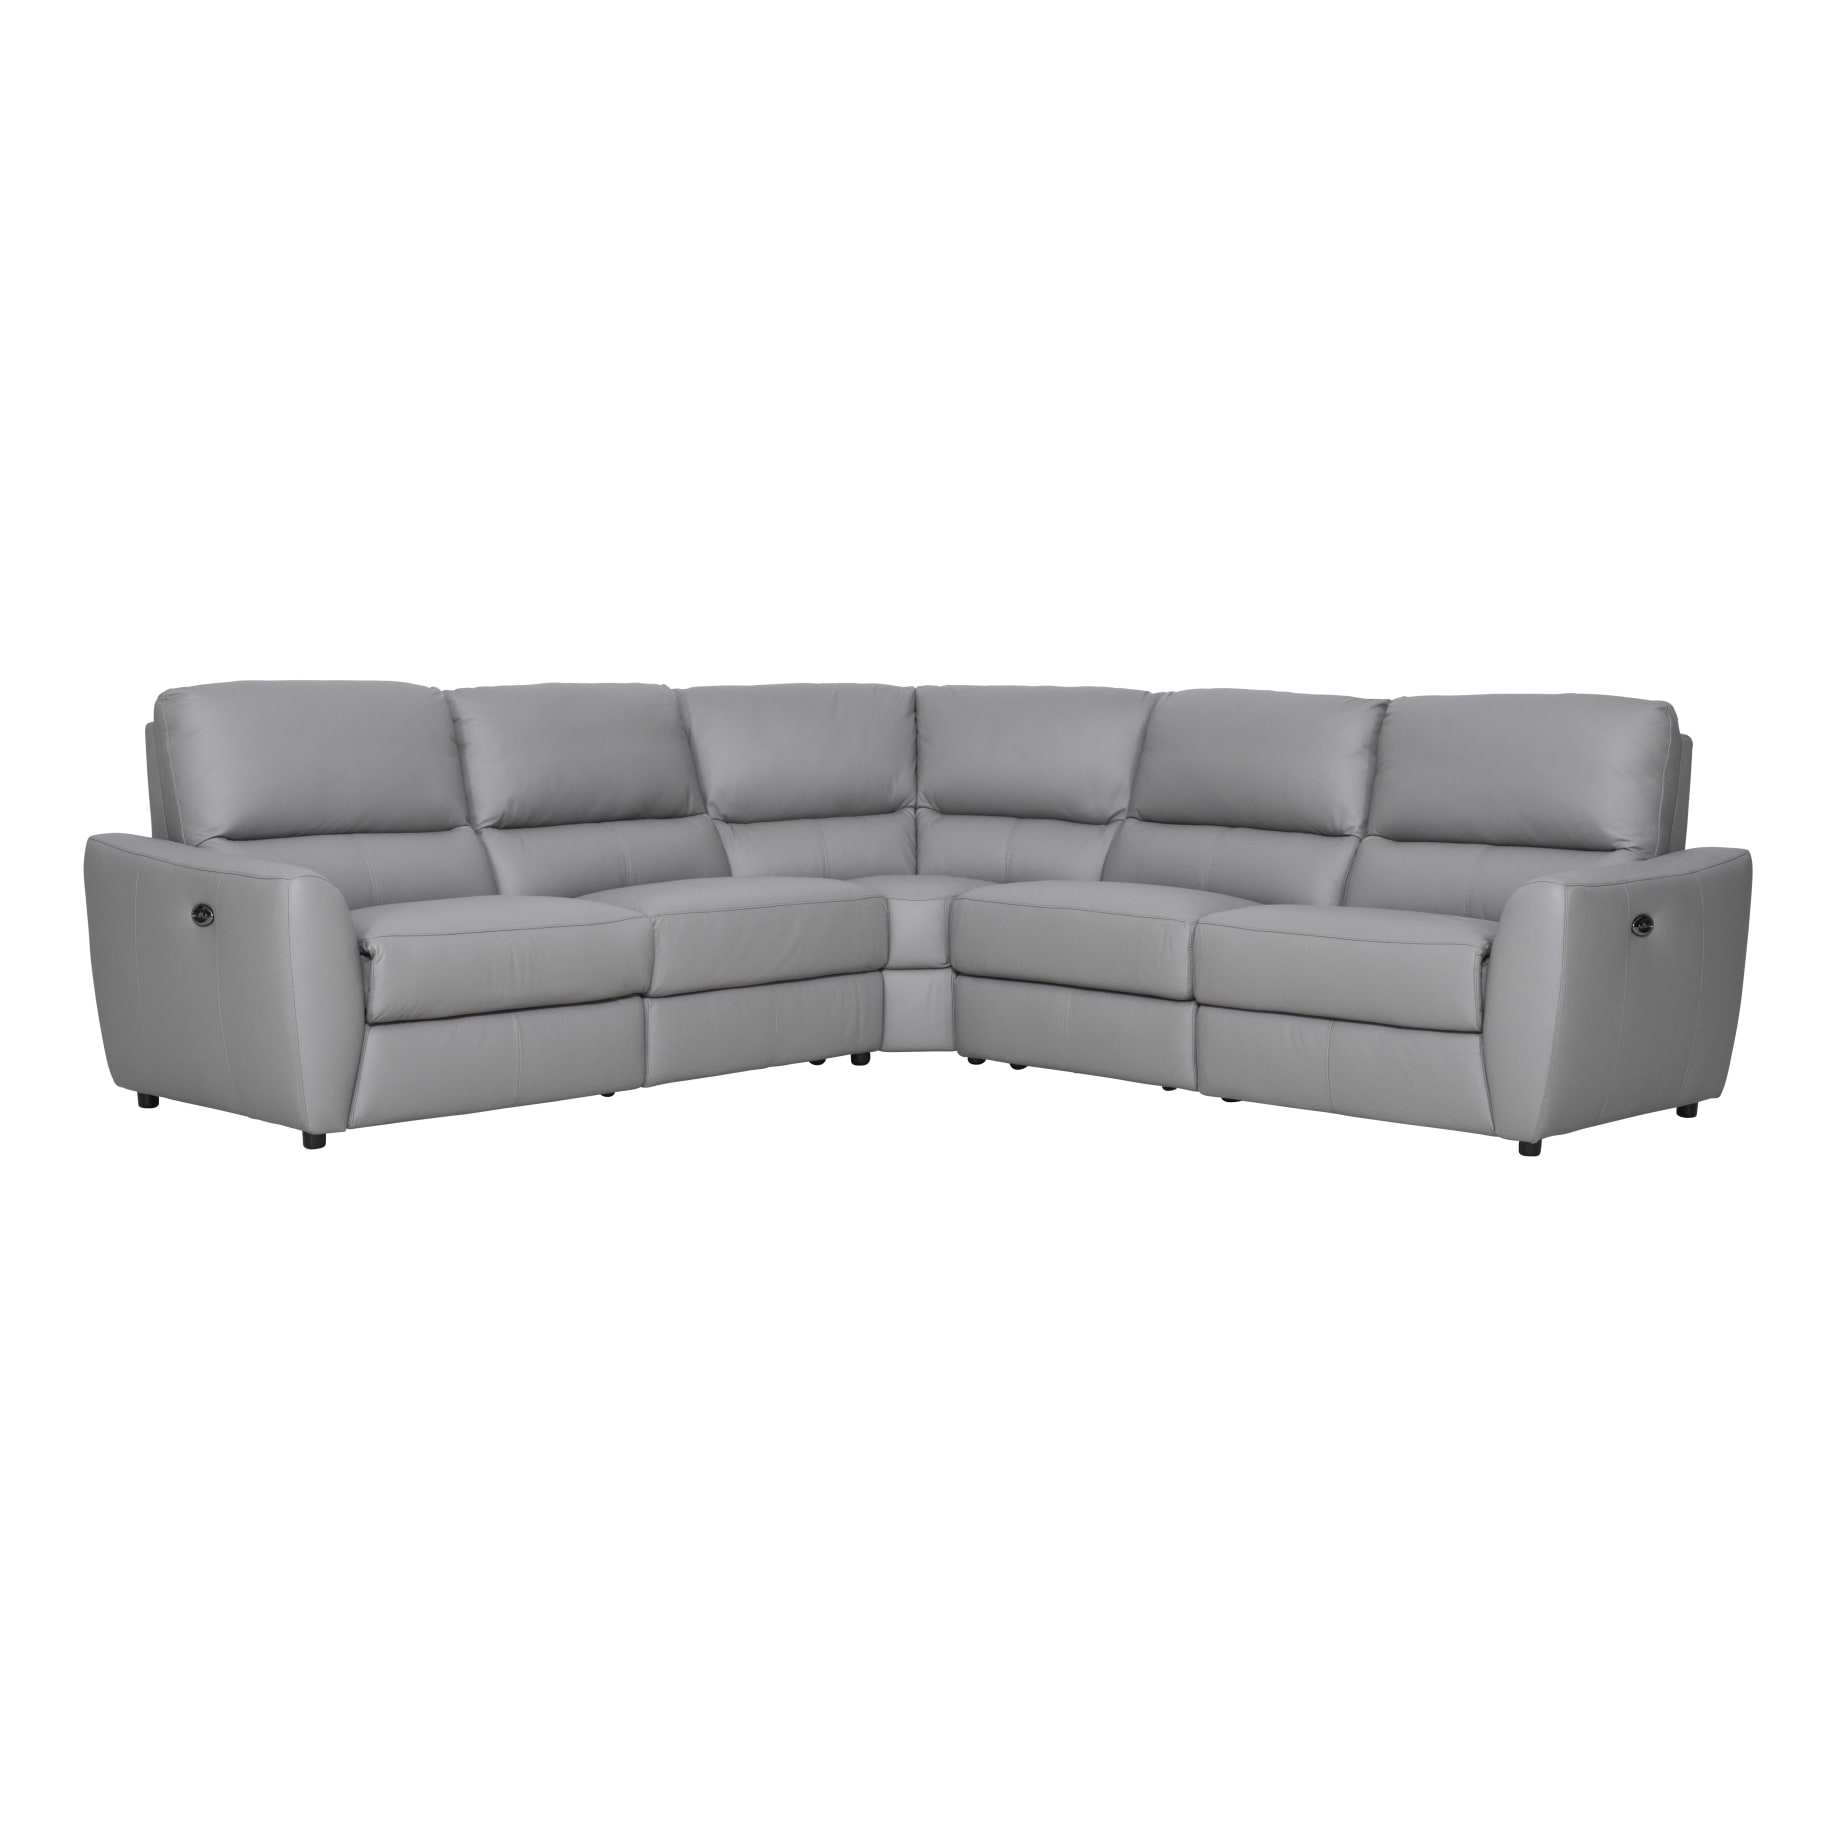 Portland Modular Sofa with 2 Recliners in Leather Pewter